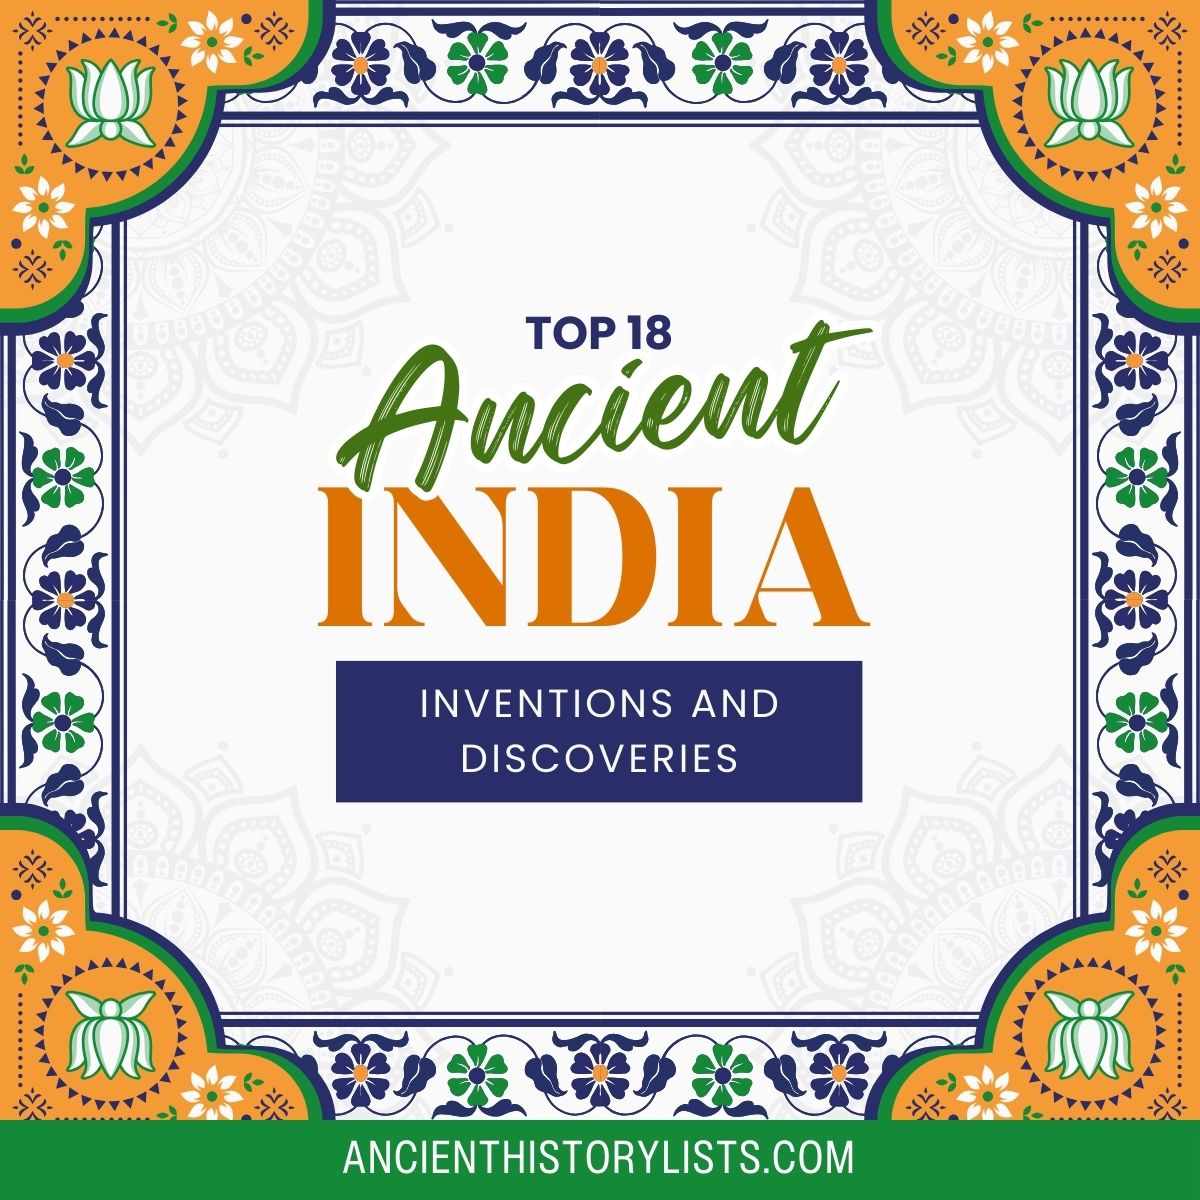 Ancient Indian Inventions and Discoveries